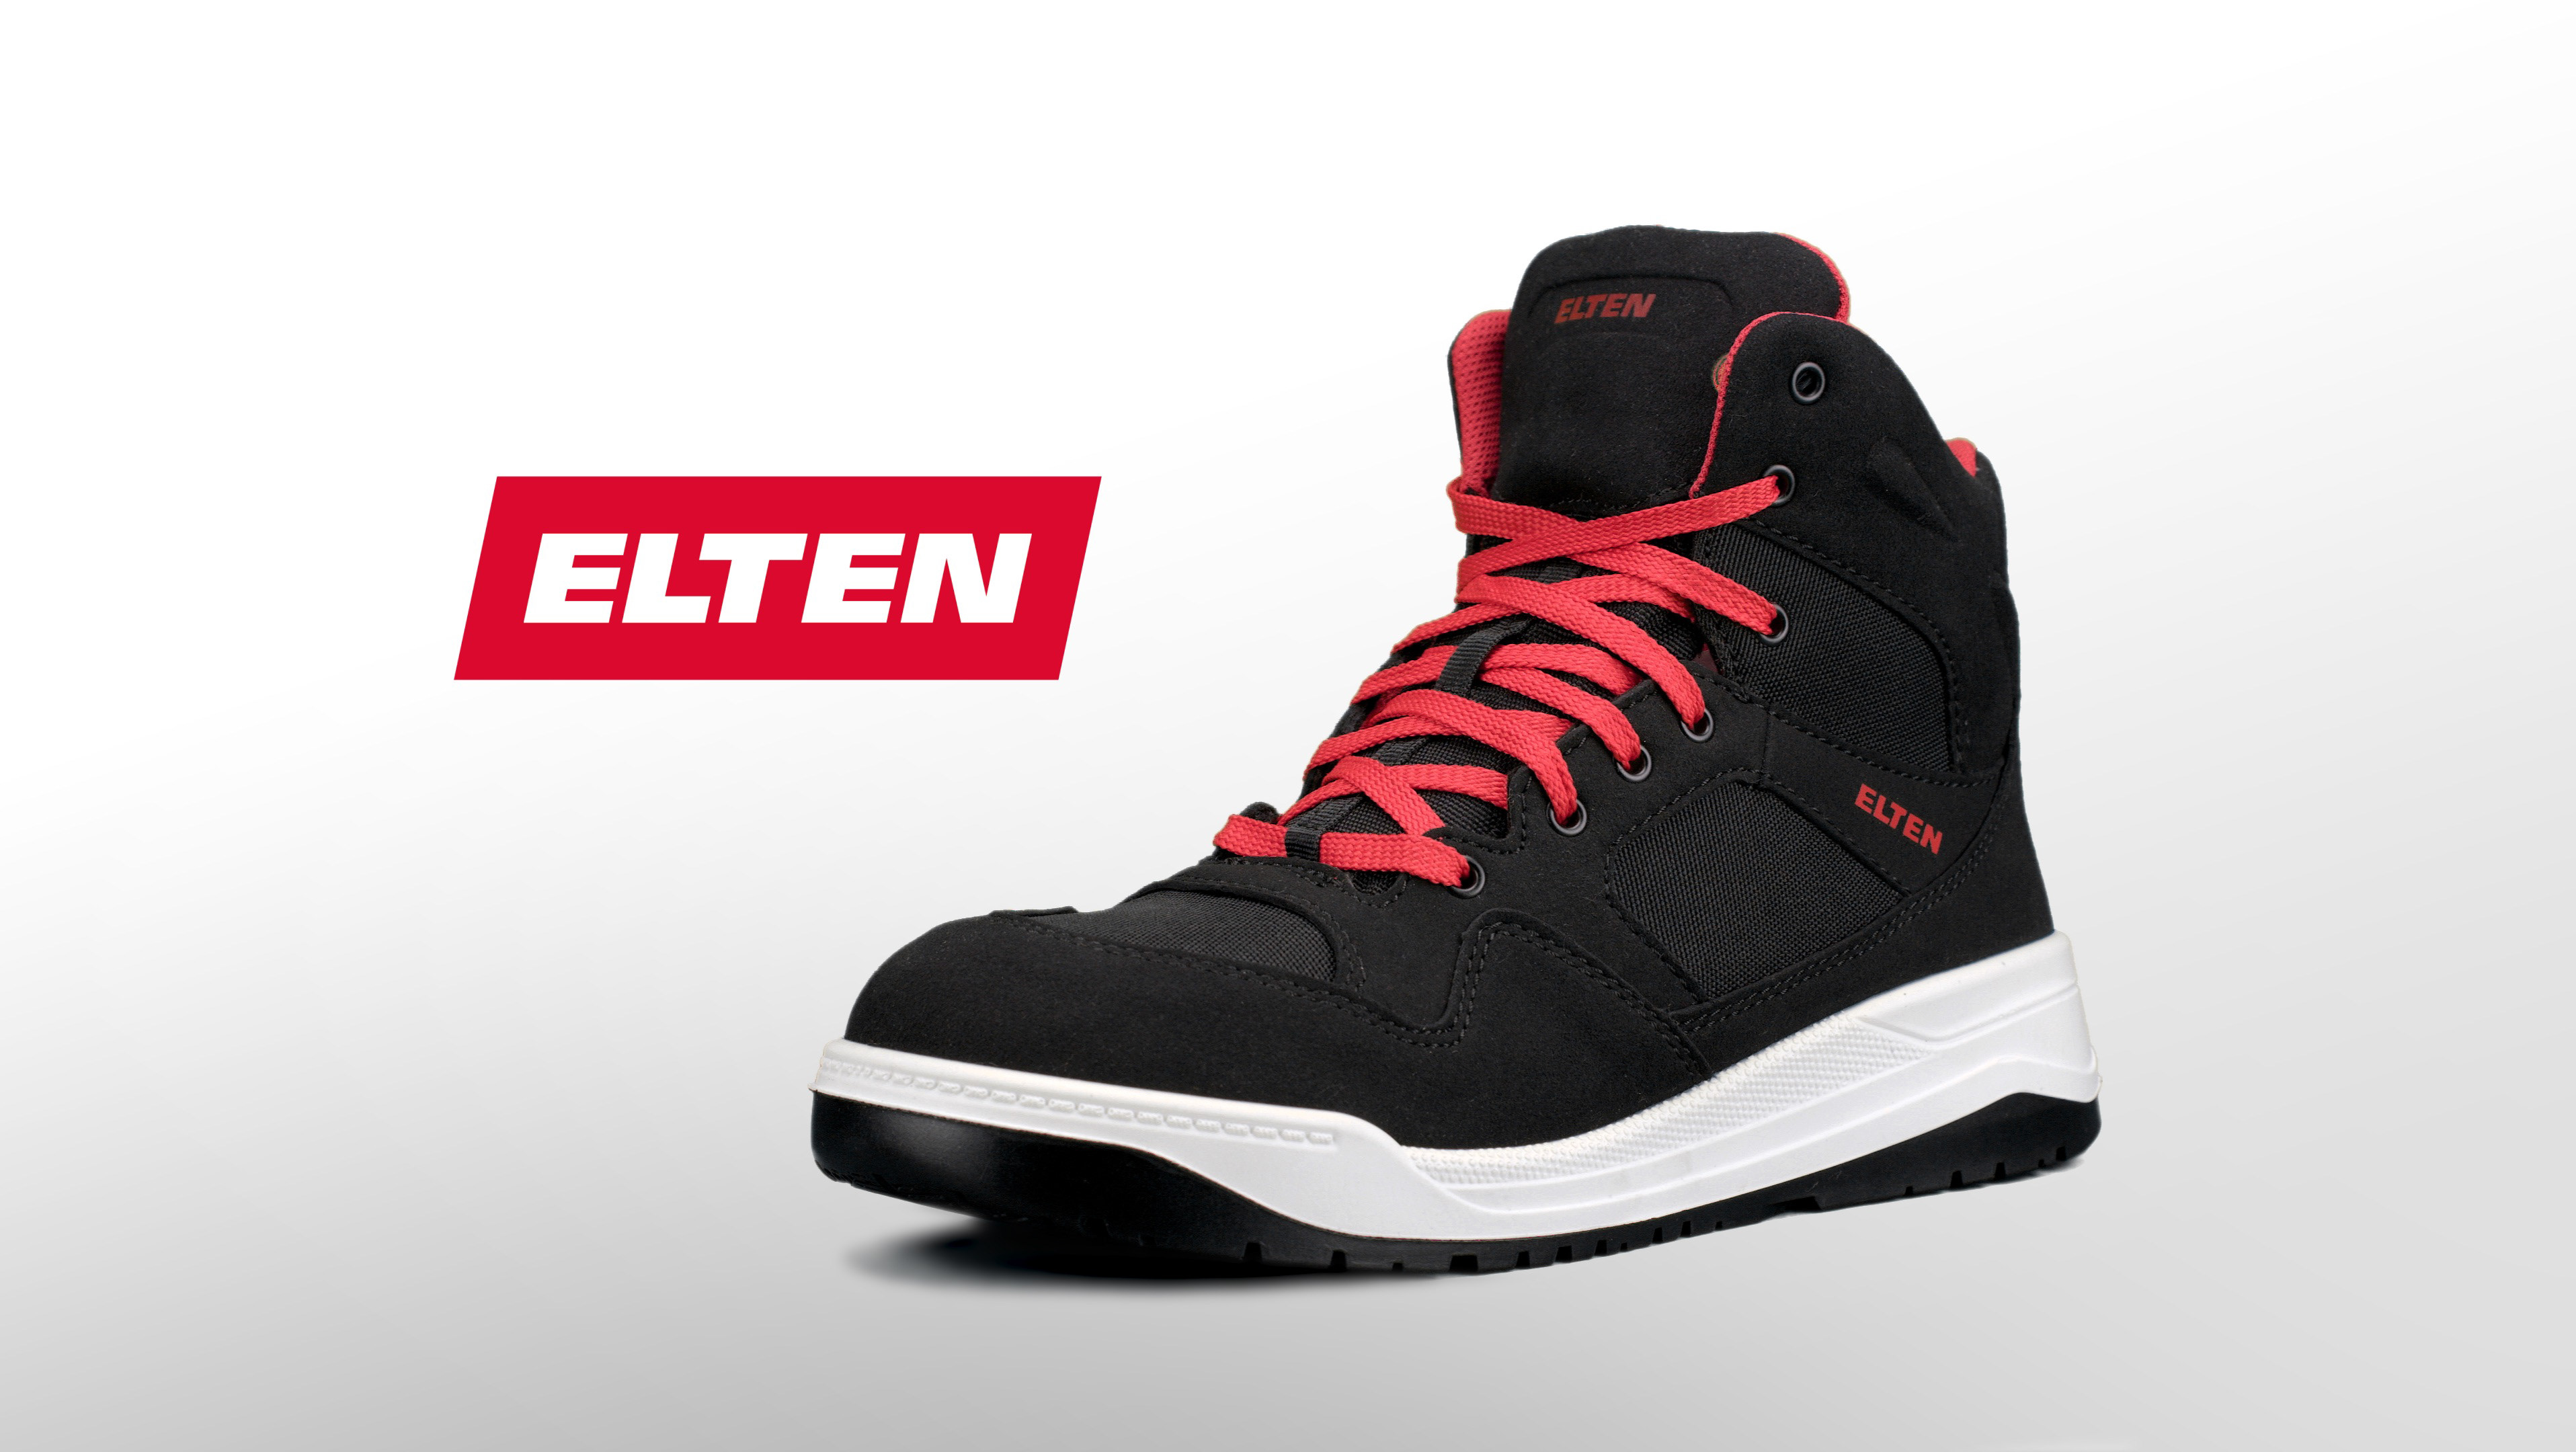 ELTEN LOSS SAFETY SHOES - LUKAS